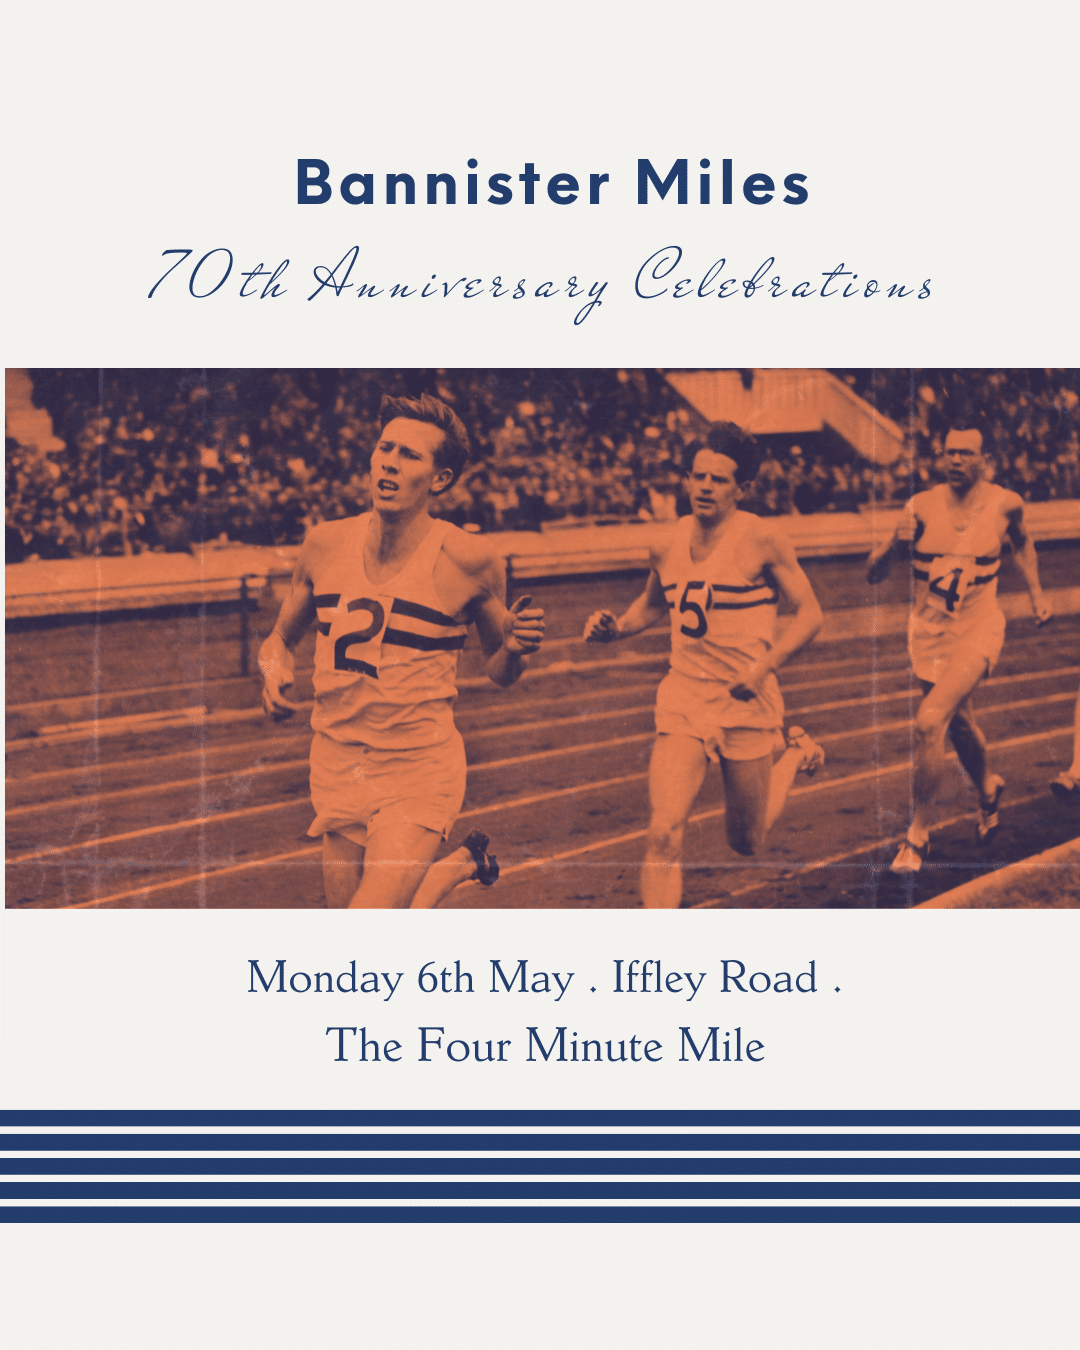 Bannister Miles, 70th Anniversary Celebrations